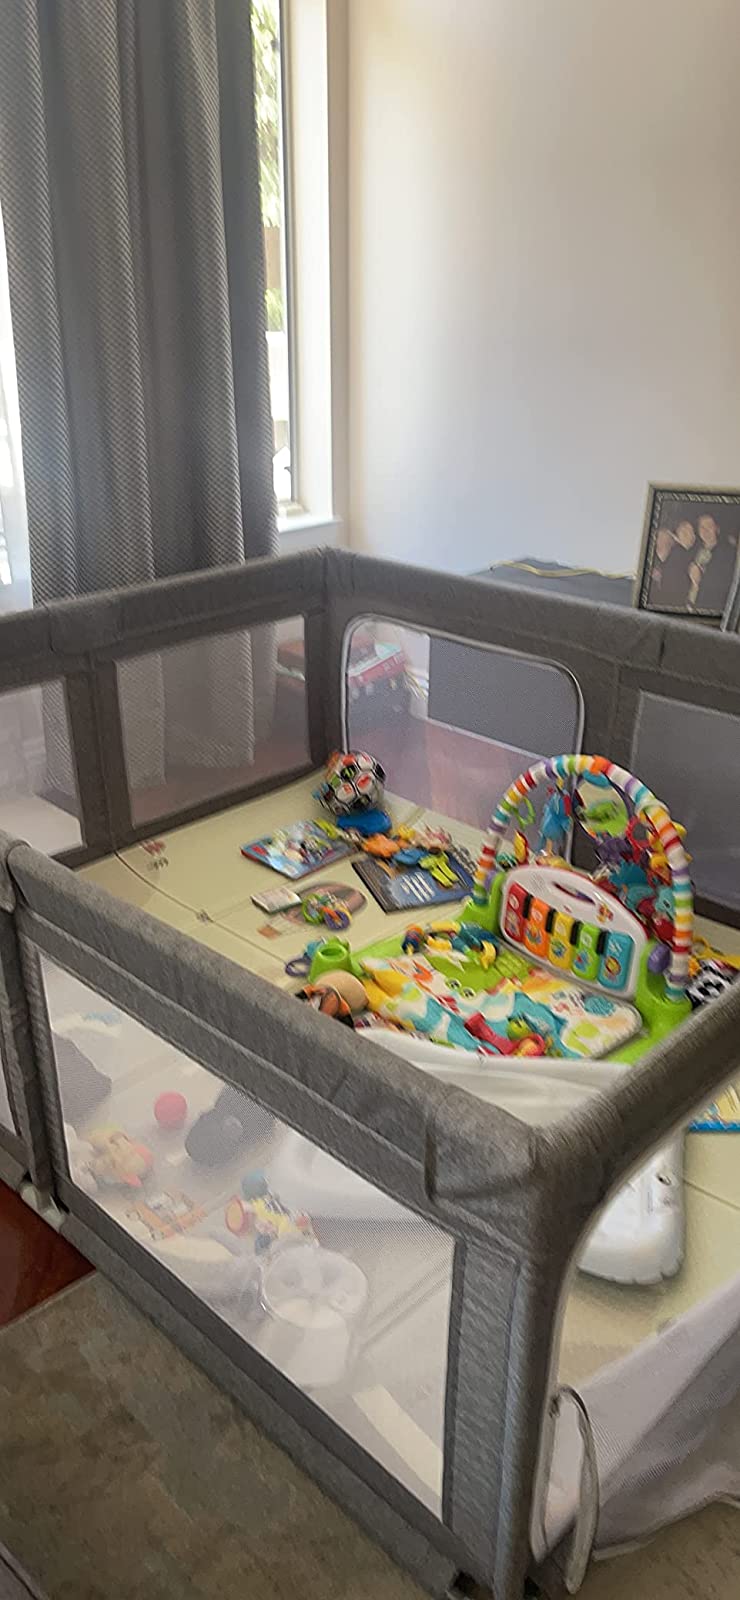 79" Baby Playpen Extra Large Play Yard Indoor Outdoor Kids Activity Center &Gate photo review